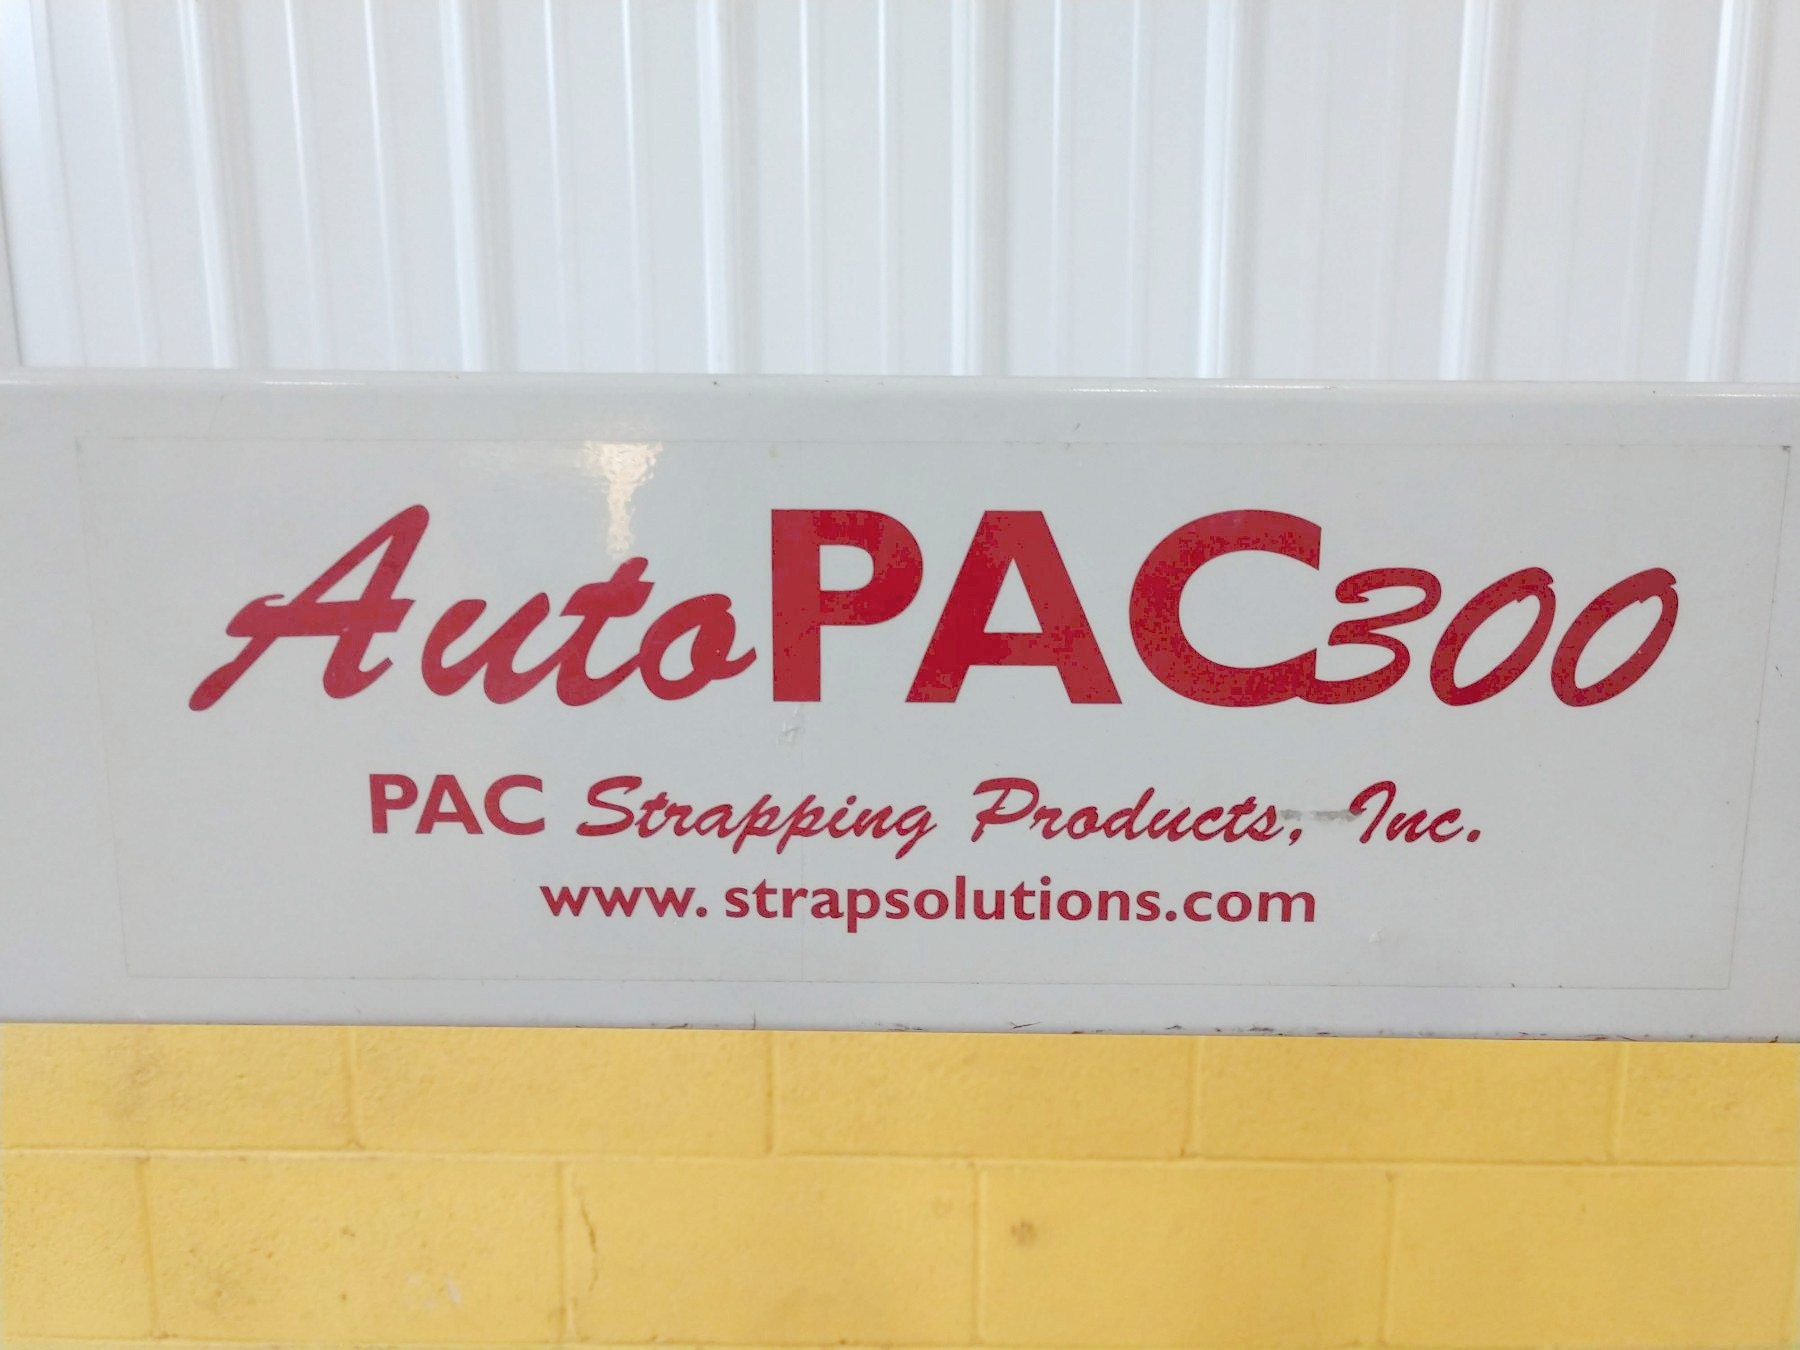 Autopac 300 Strapping Products Plastic Banding Machine (Used) Item # UE-070921B (Ohio)